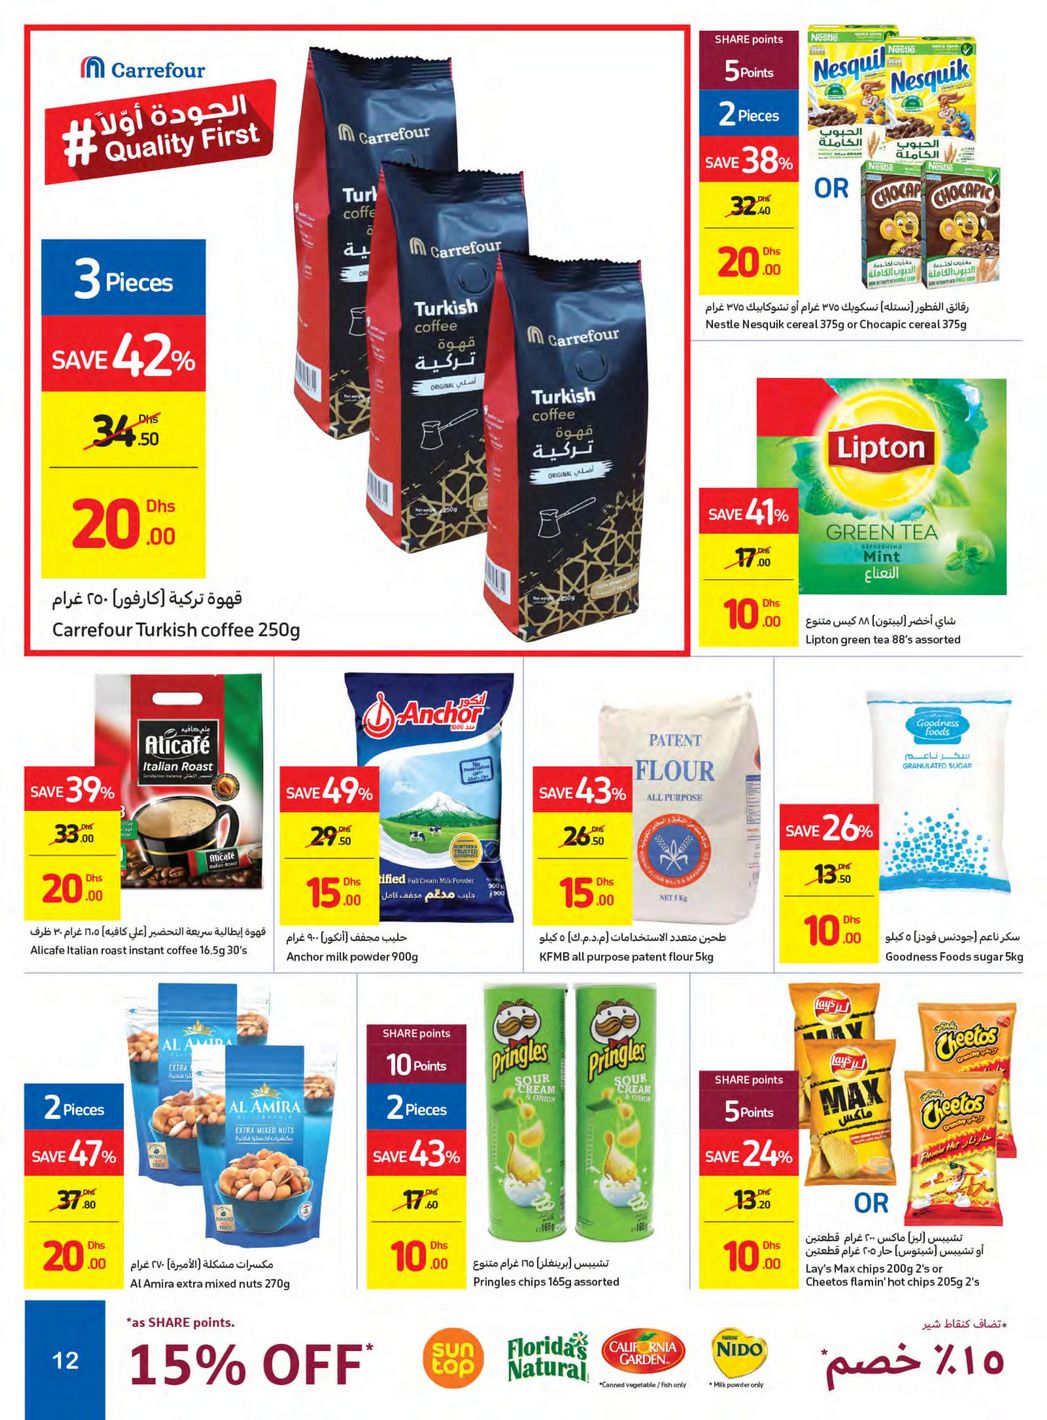 Carrefour Offers from 13/2 till 23/2 | Carrefour UAE 13